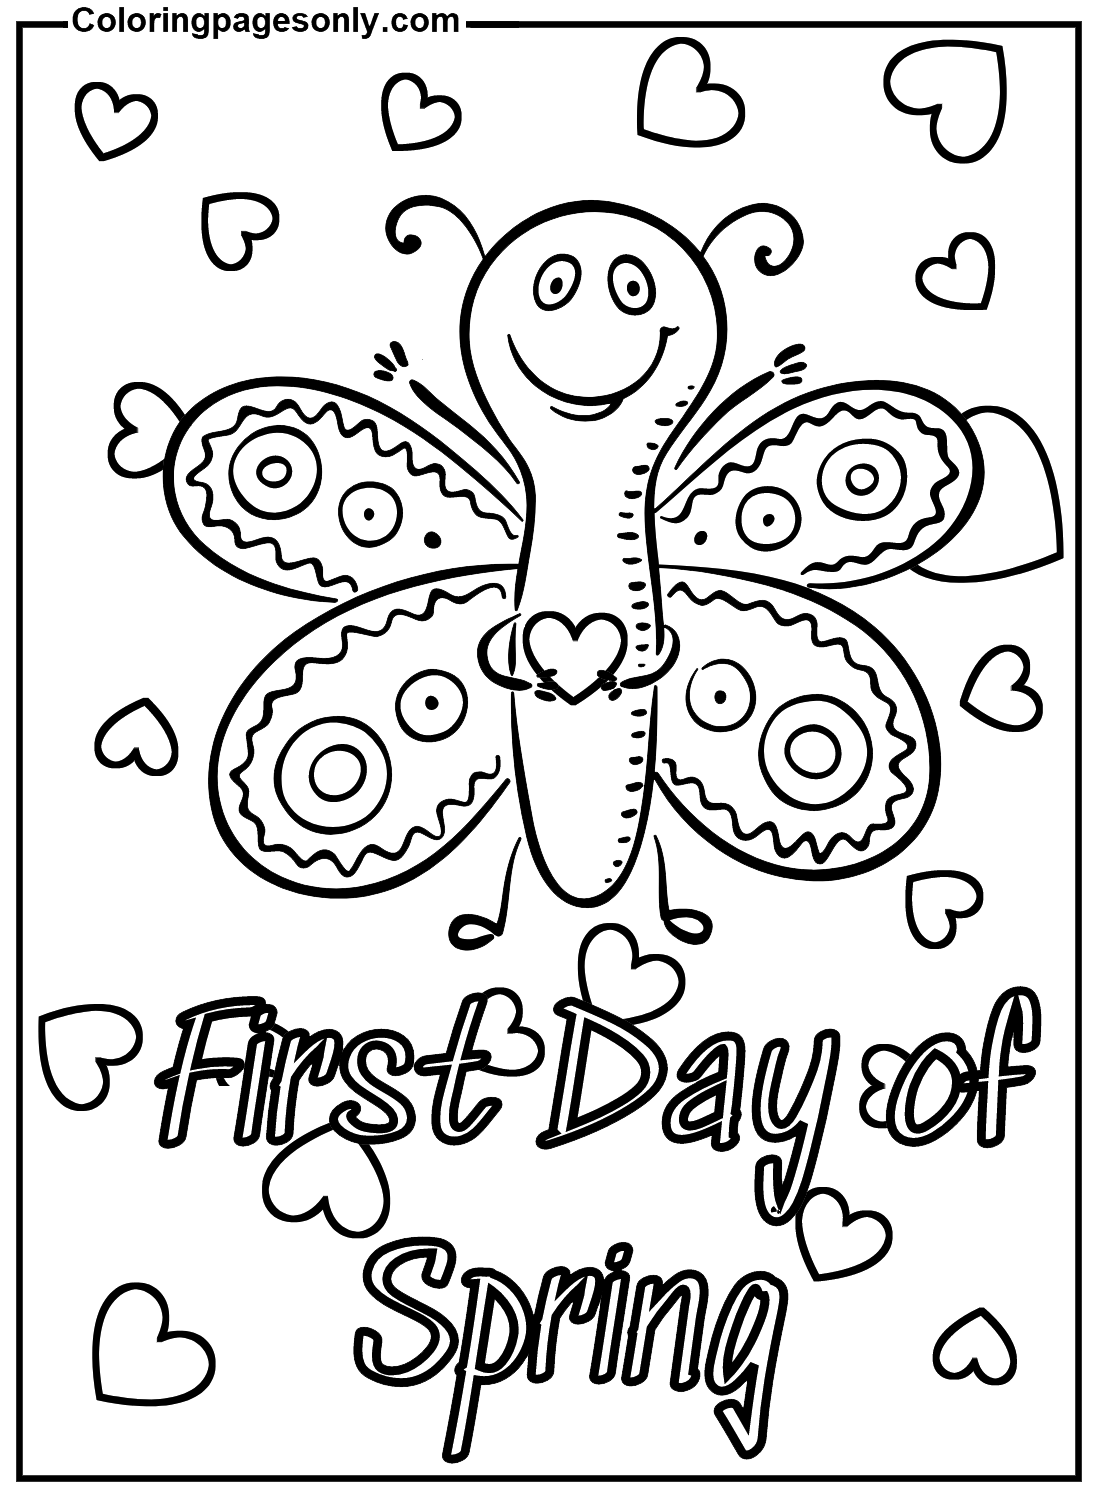 Free First Day Of Spring Coloring Pages